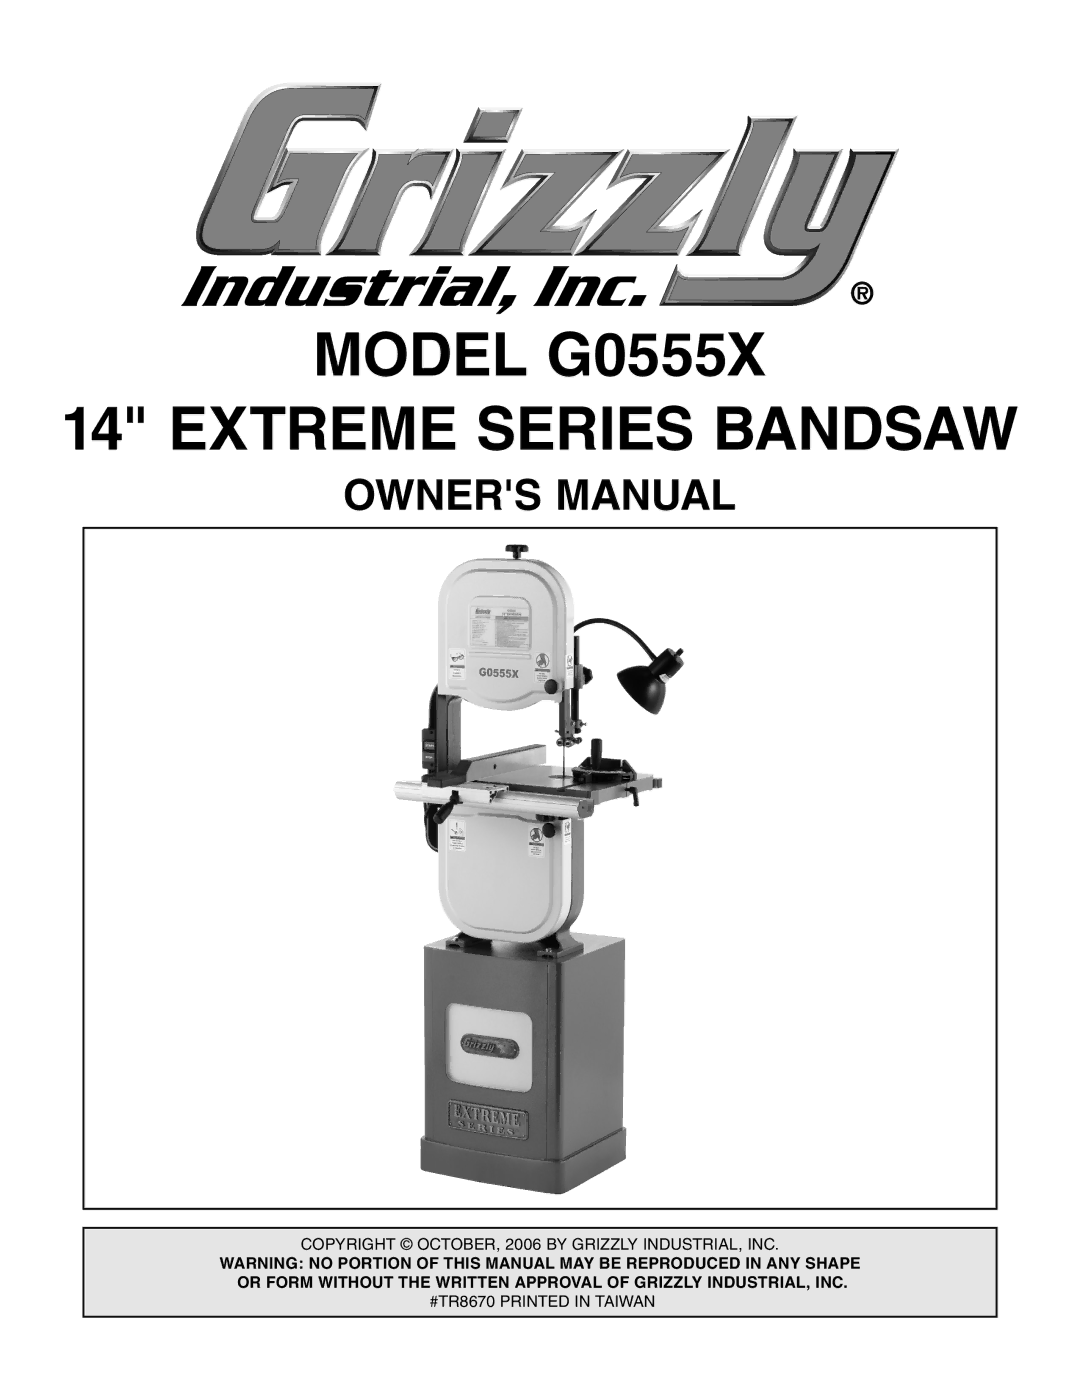 Grizzly owner manual Model G0555X Extreme Series Bandsaw 